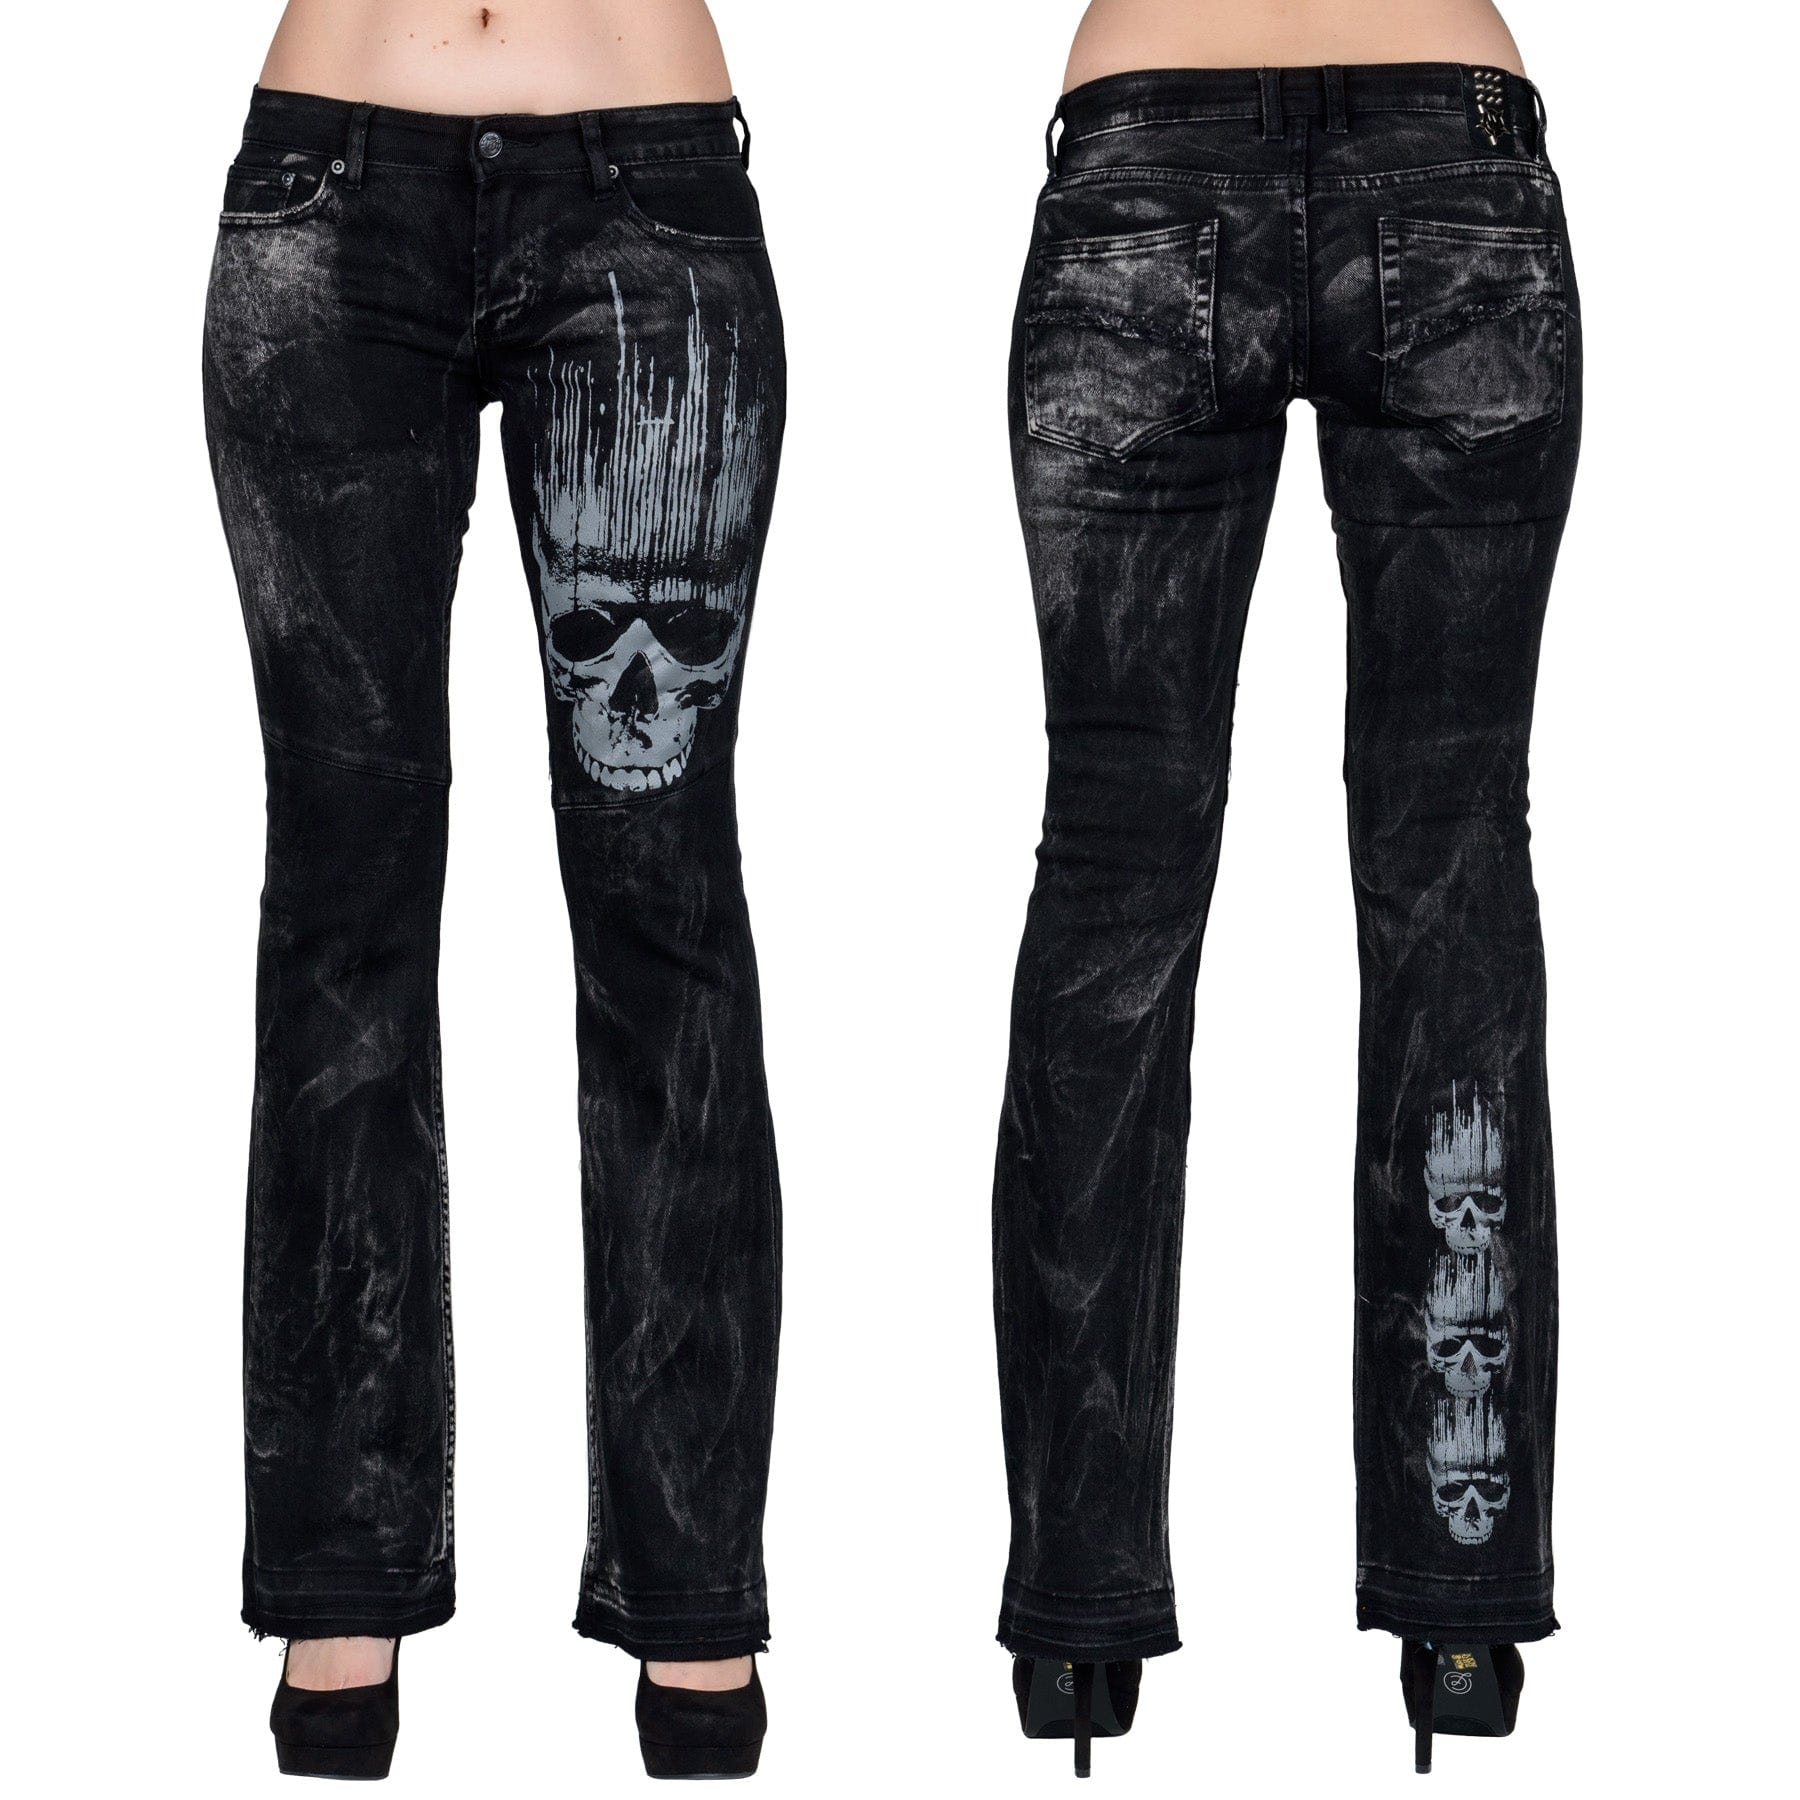 All Access Collection Pants Headhunter Unisex Jeans